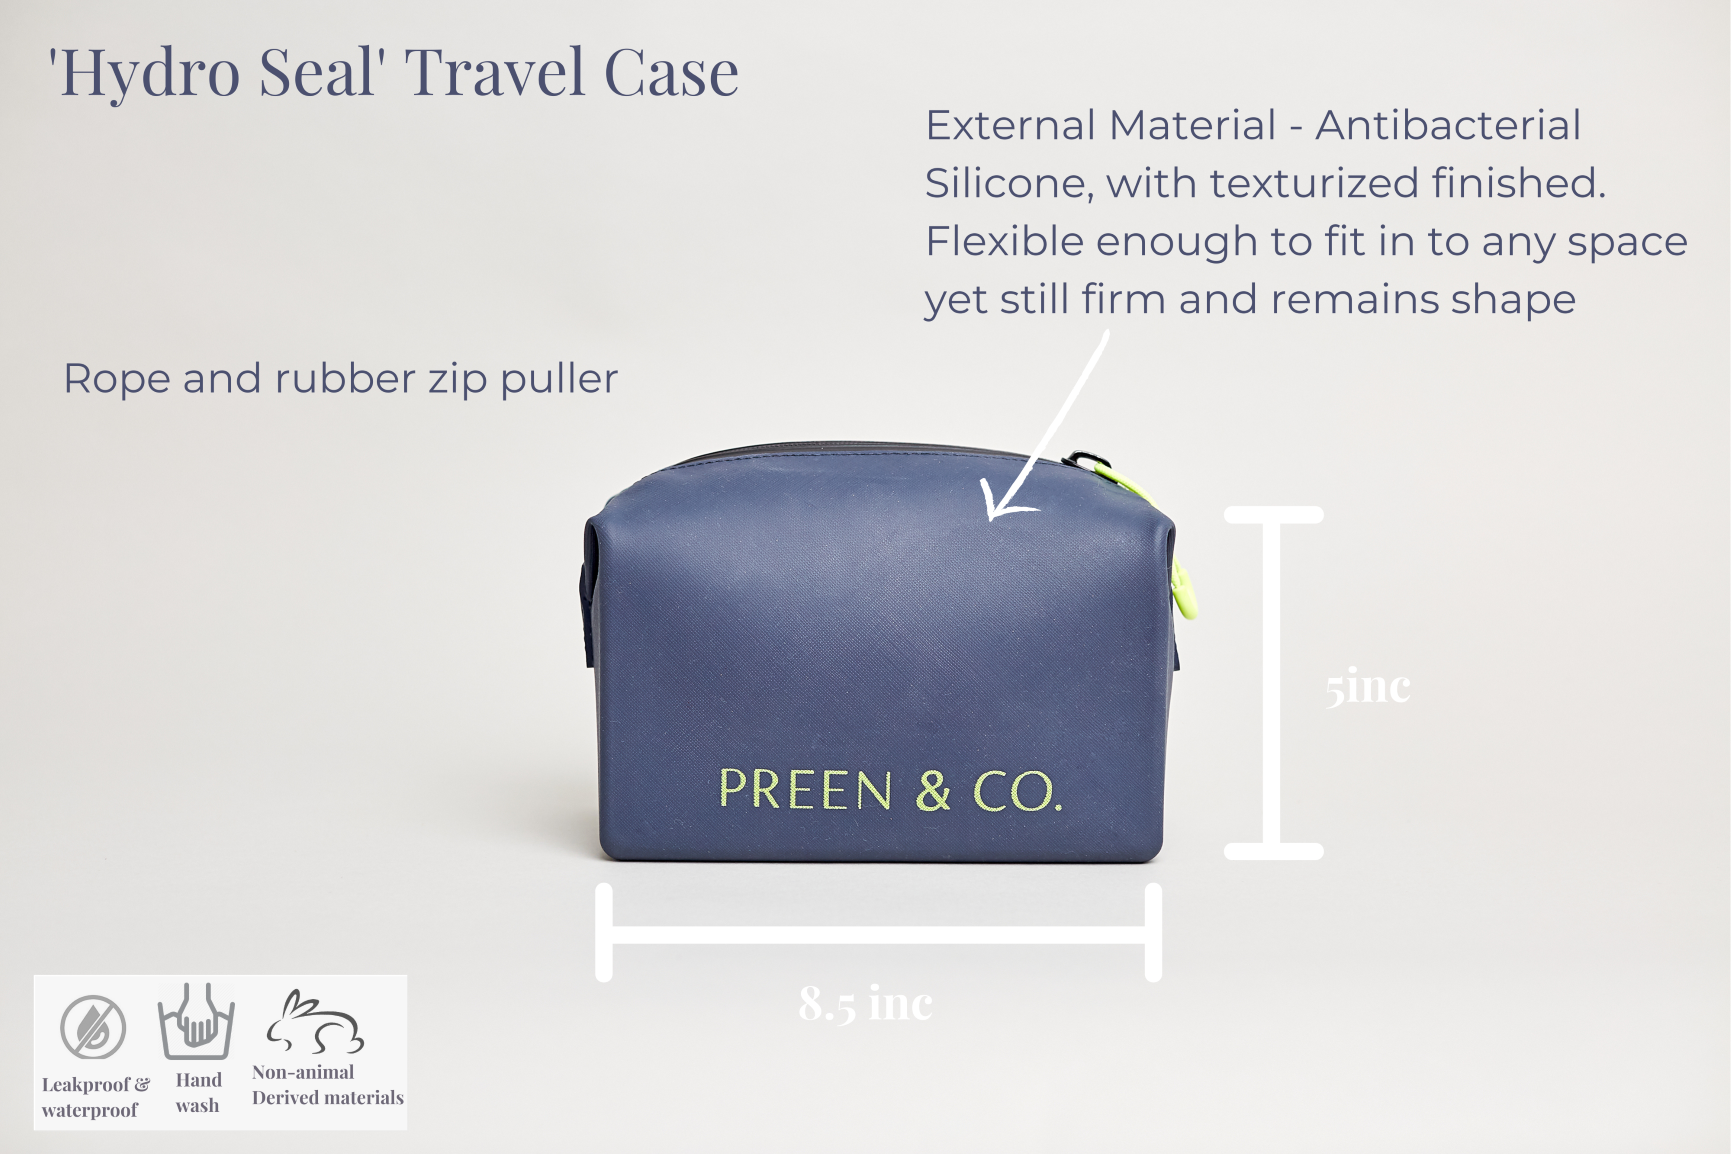 Hydro Seal Toiletry Case in Midnight Blue - PREEN & CO